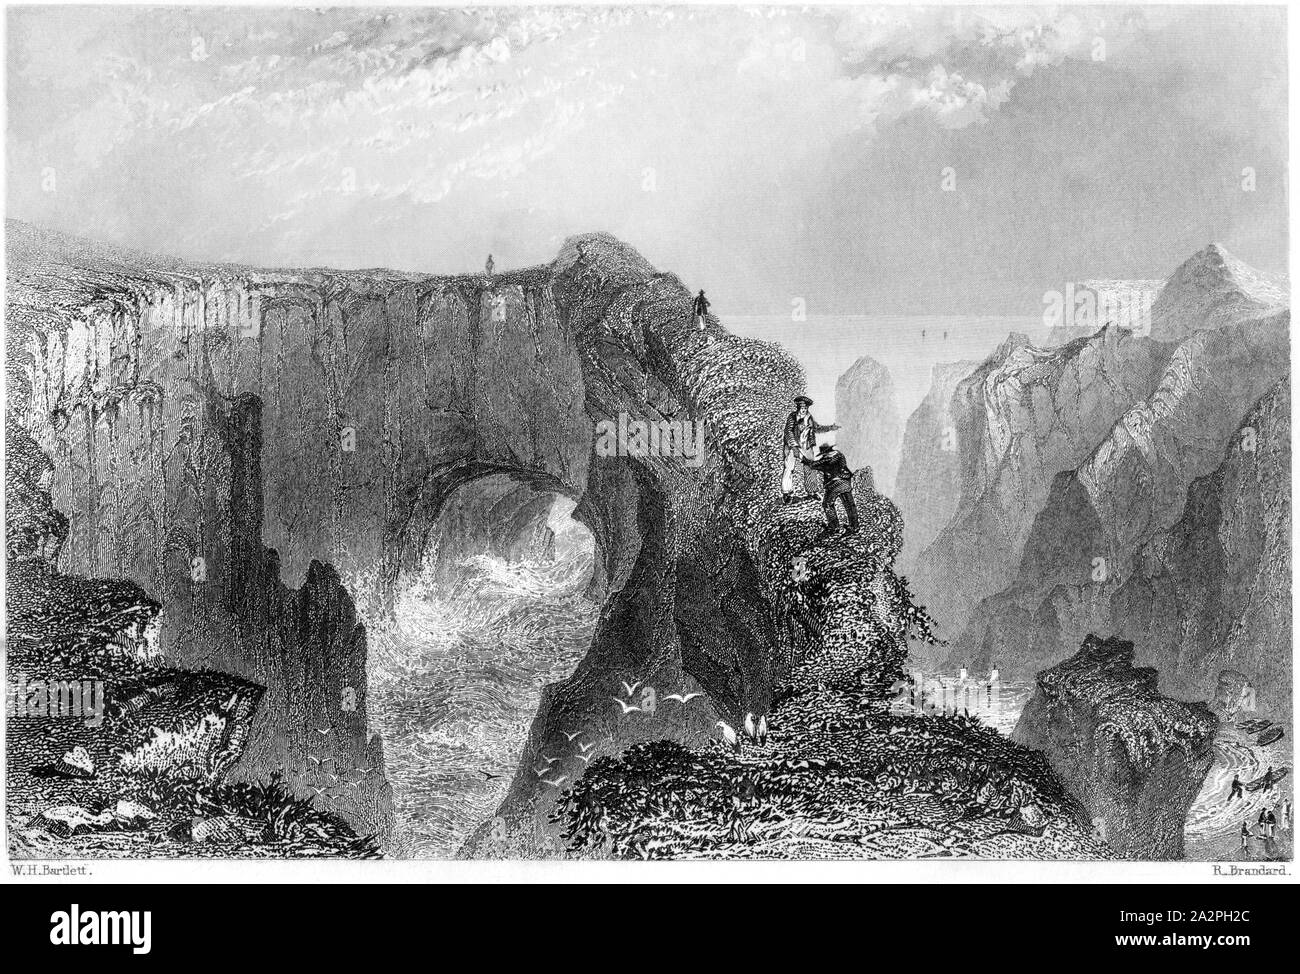 An engraving of The Buller of Buchan near Peterhead scanned at high resolution from a book printed in 1842.  Believed copyright free. Stock Photo